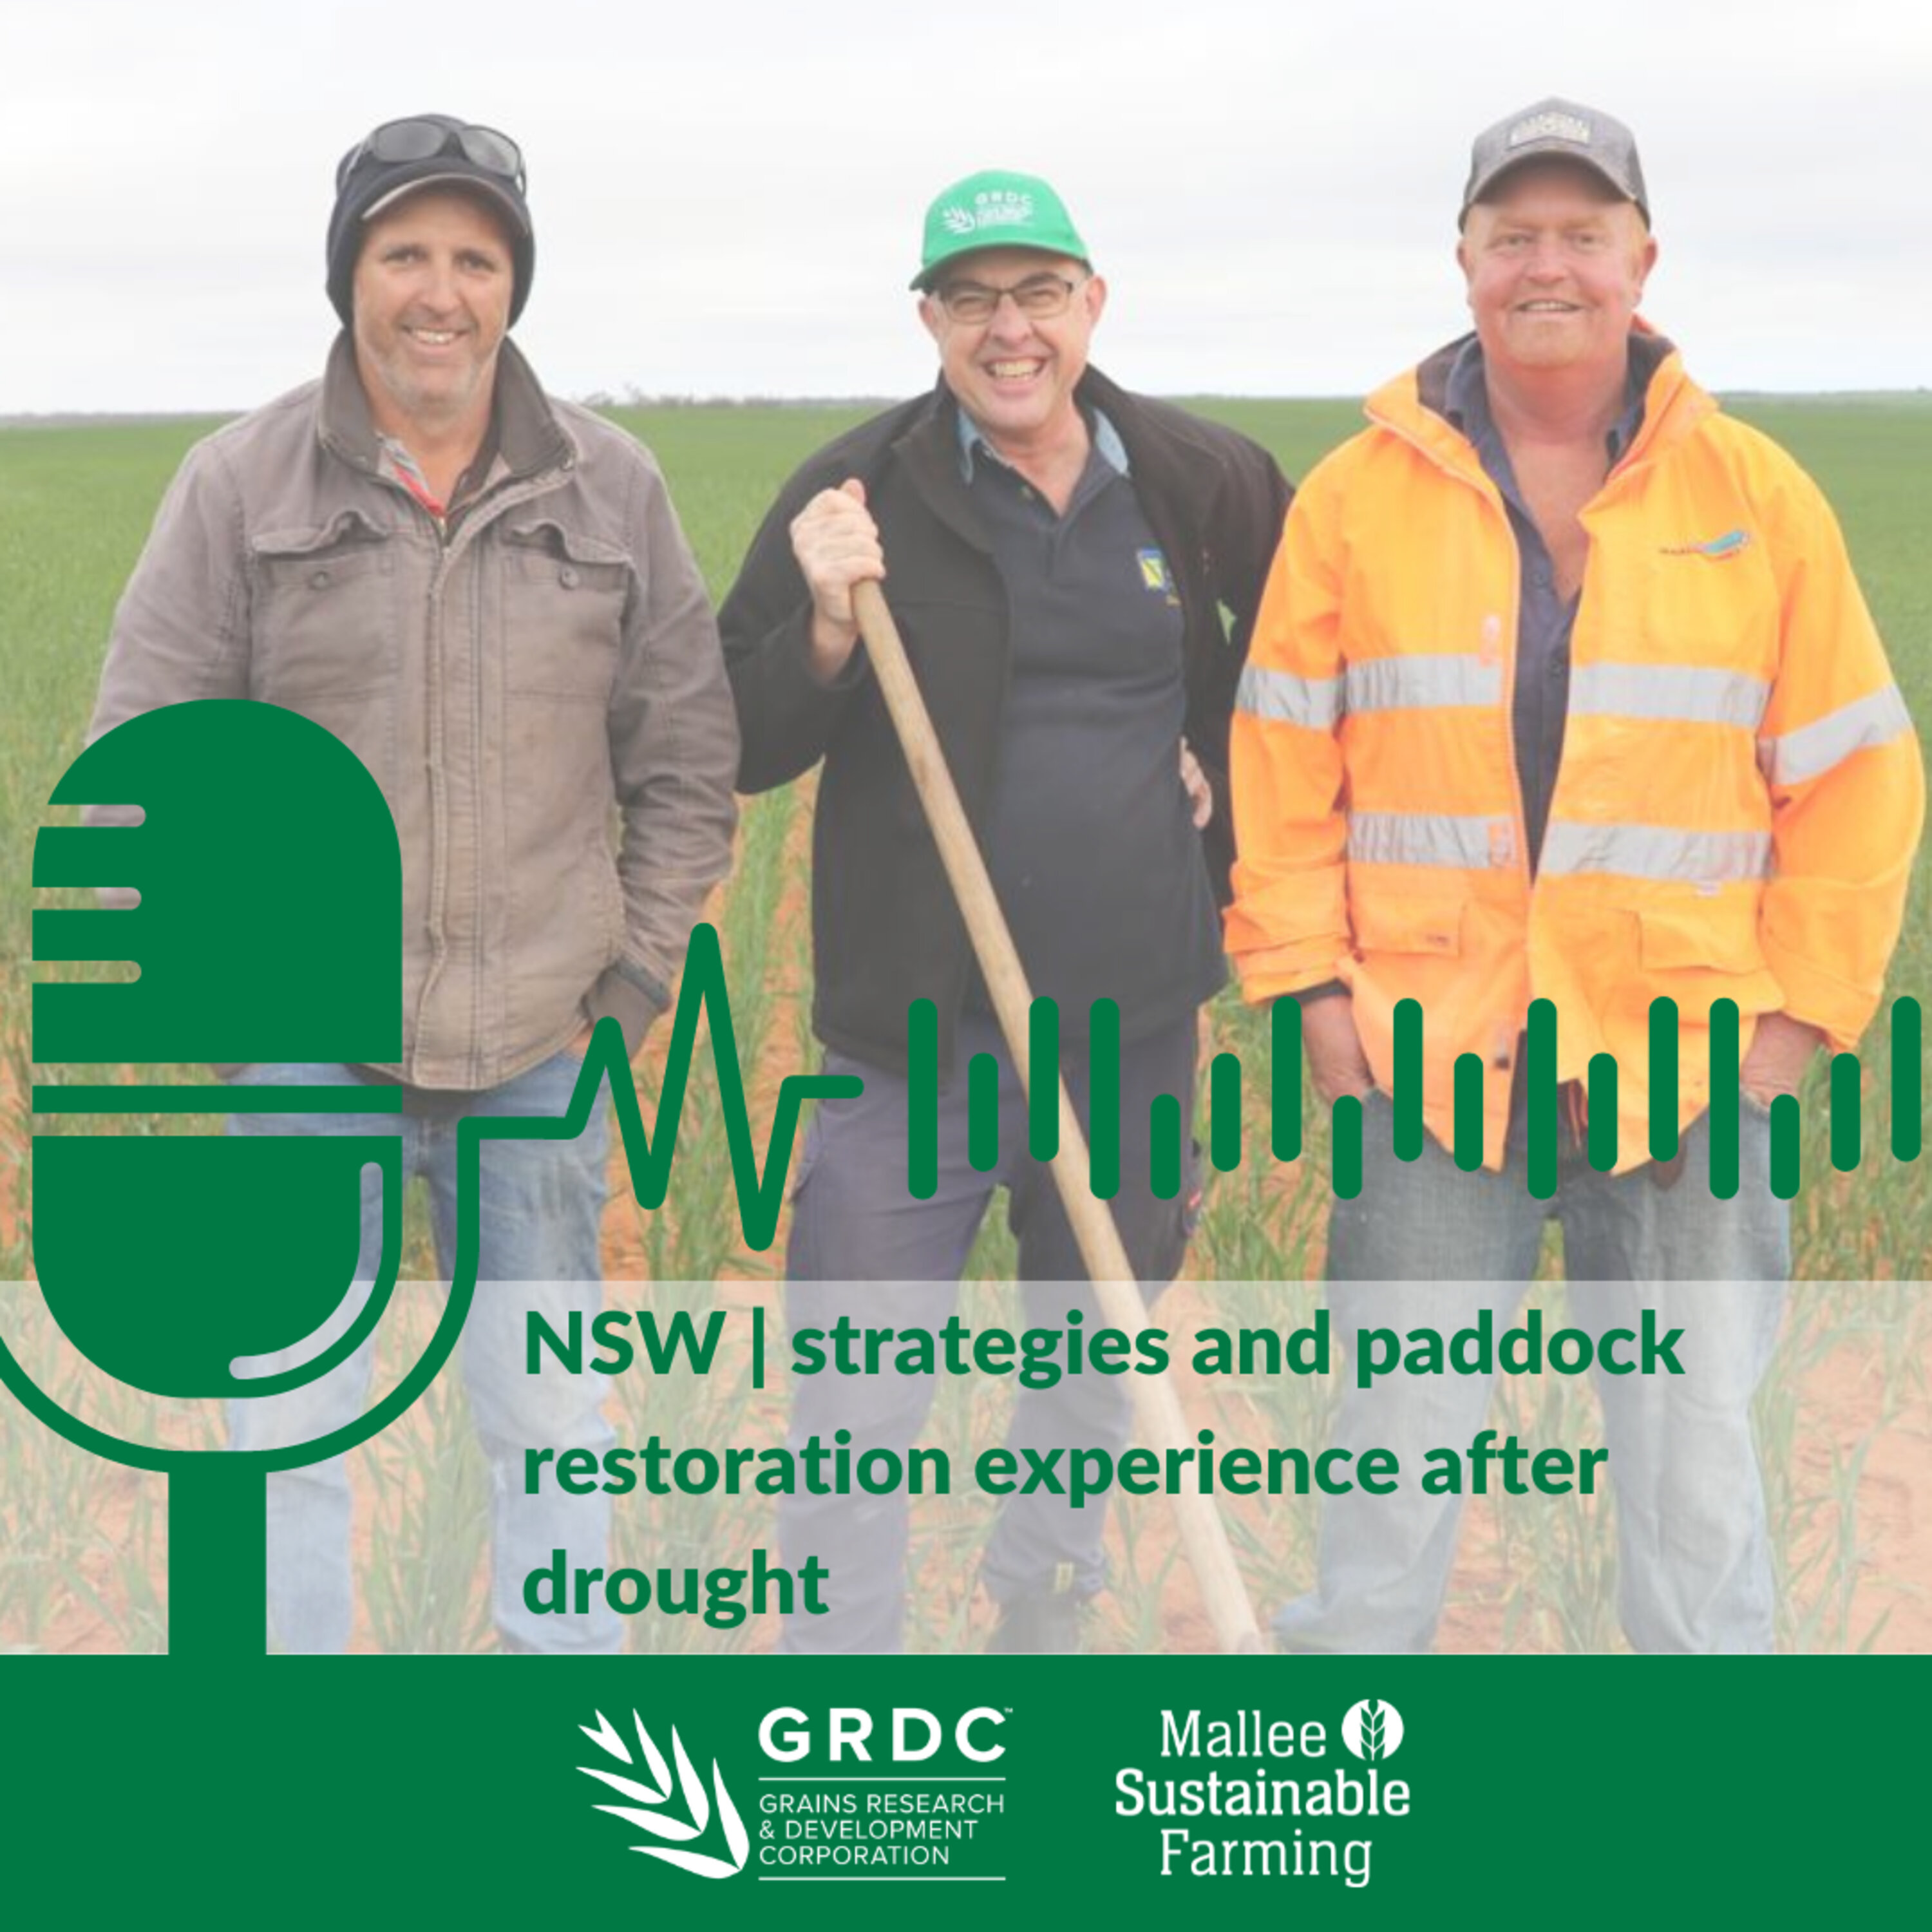 NSW strategies and paddock restoration experience after drought